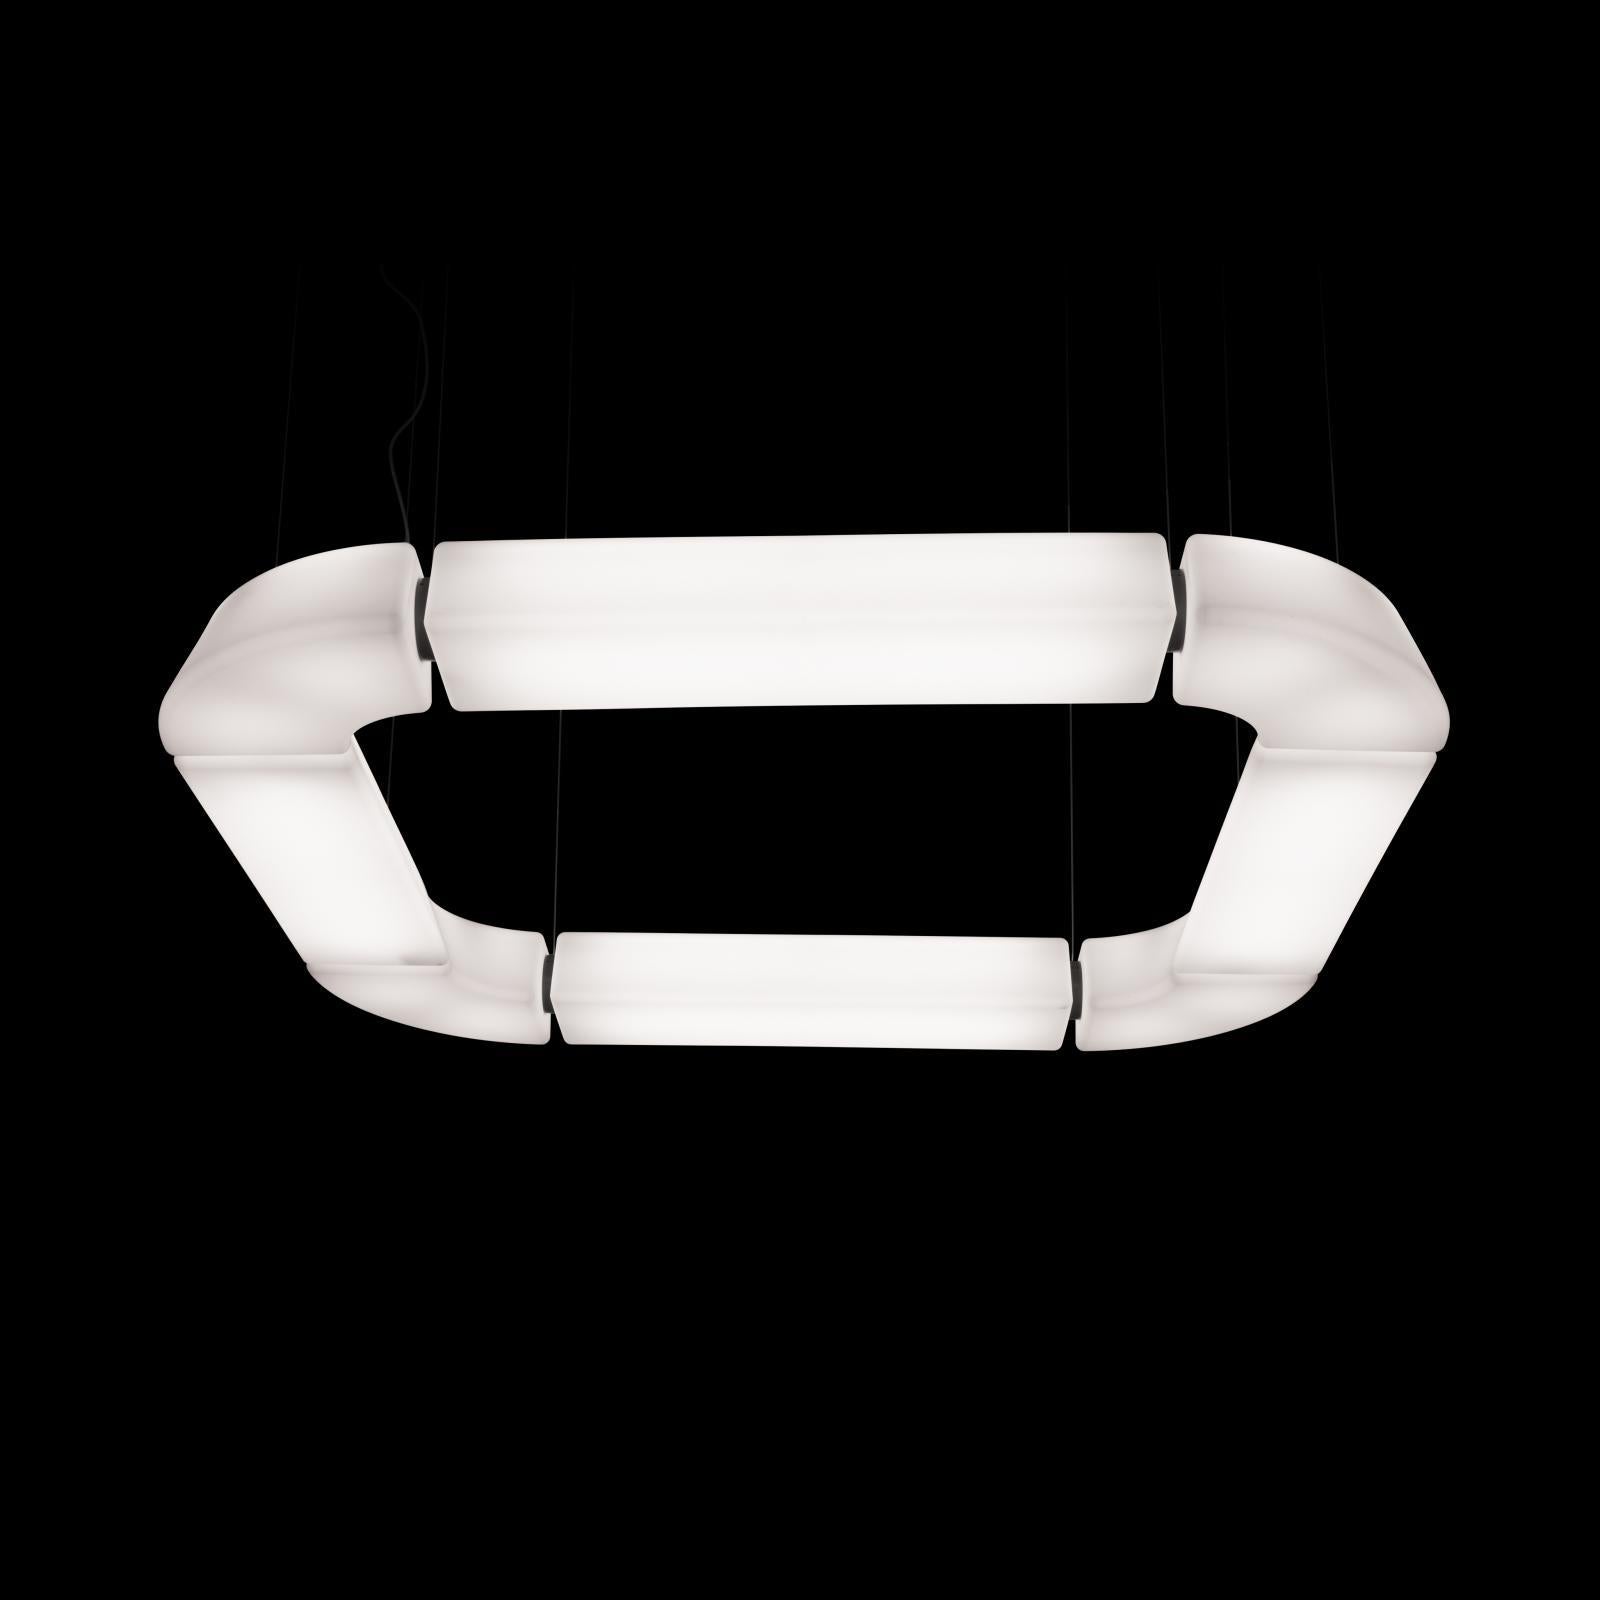 Hanging lamp diffused light, hanged by steel cables. Structure in white polyethylene material rotational moulded. LED light source and electronic drivers dimmable Push/Dali.
 
Technical Specifications:
Material: 
Structure: Aluminum
Diffuser: